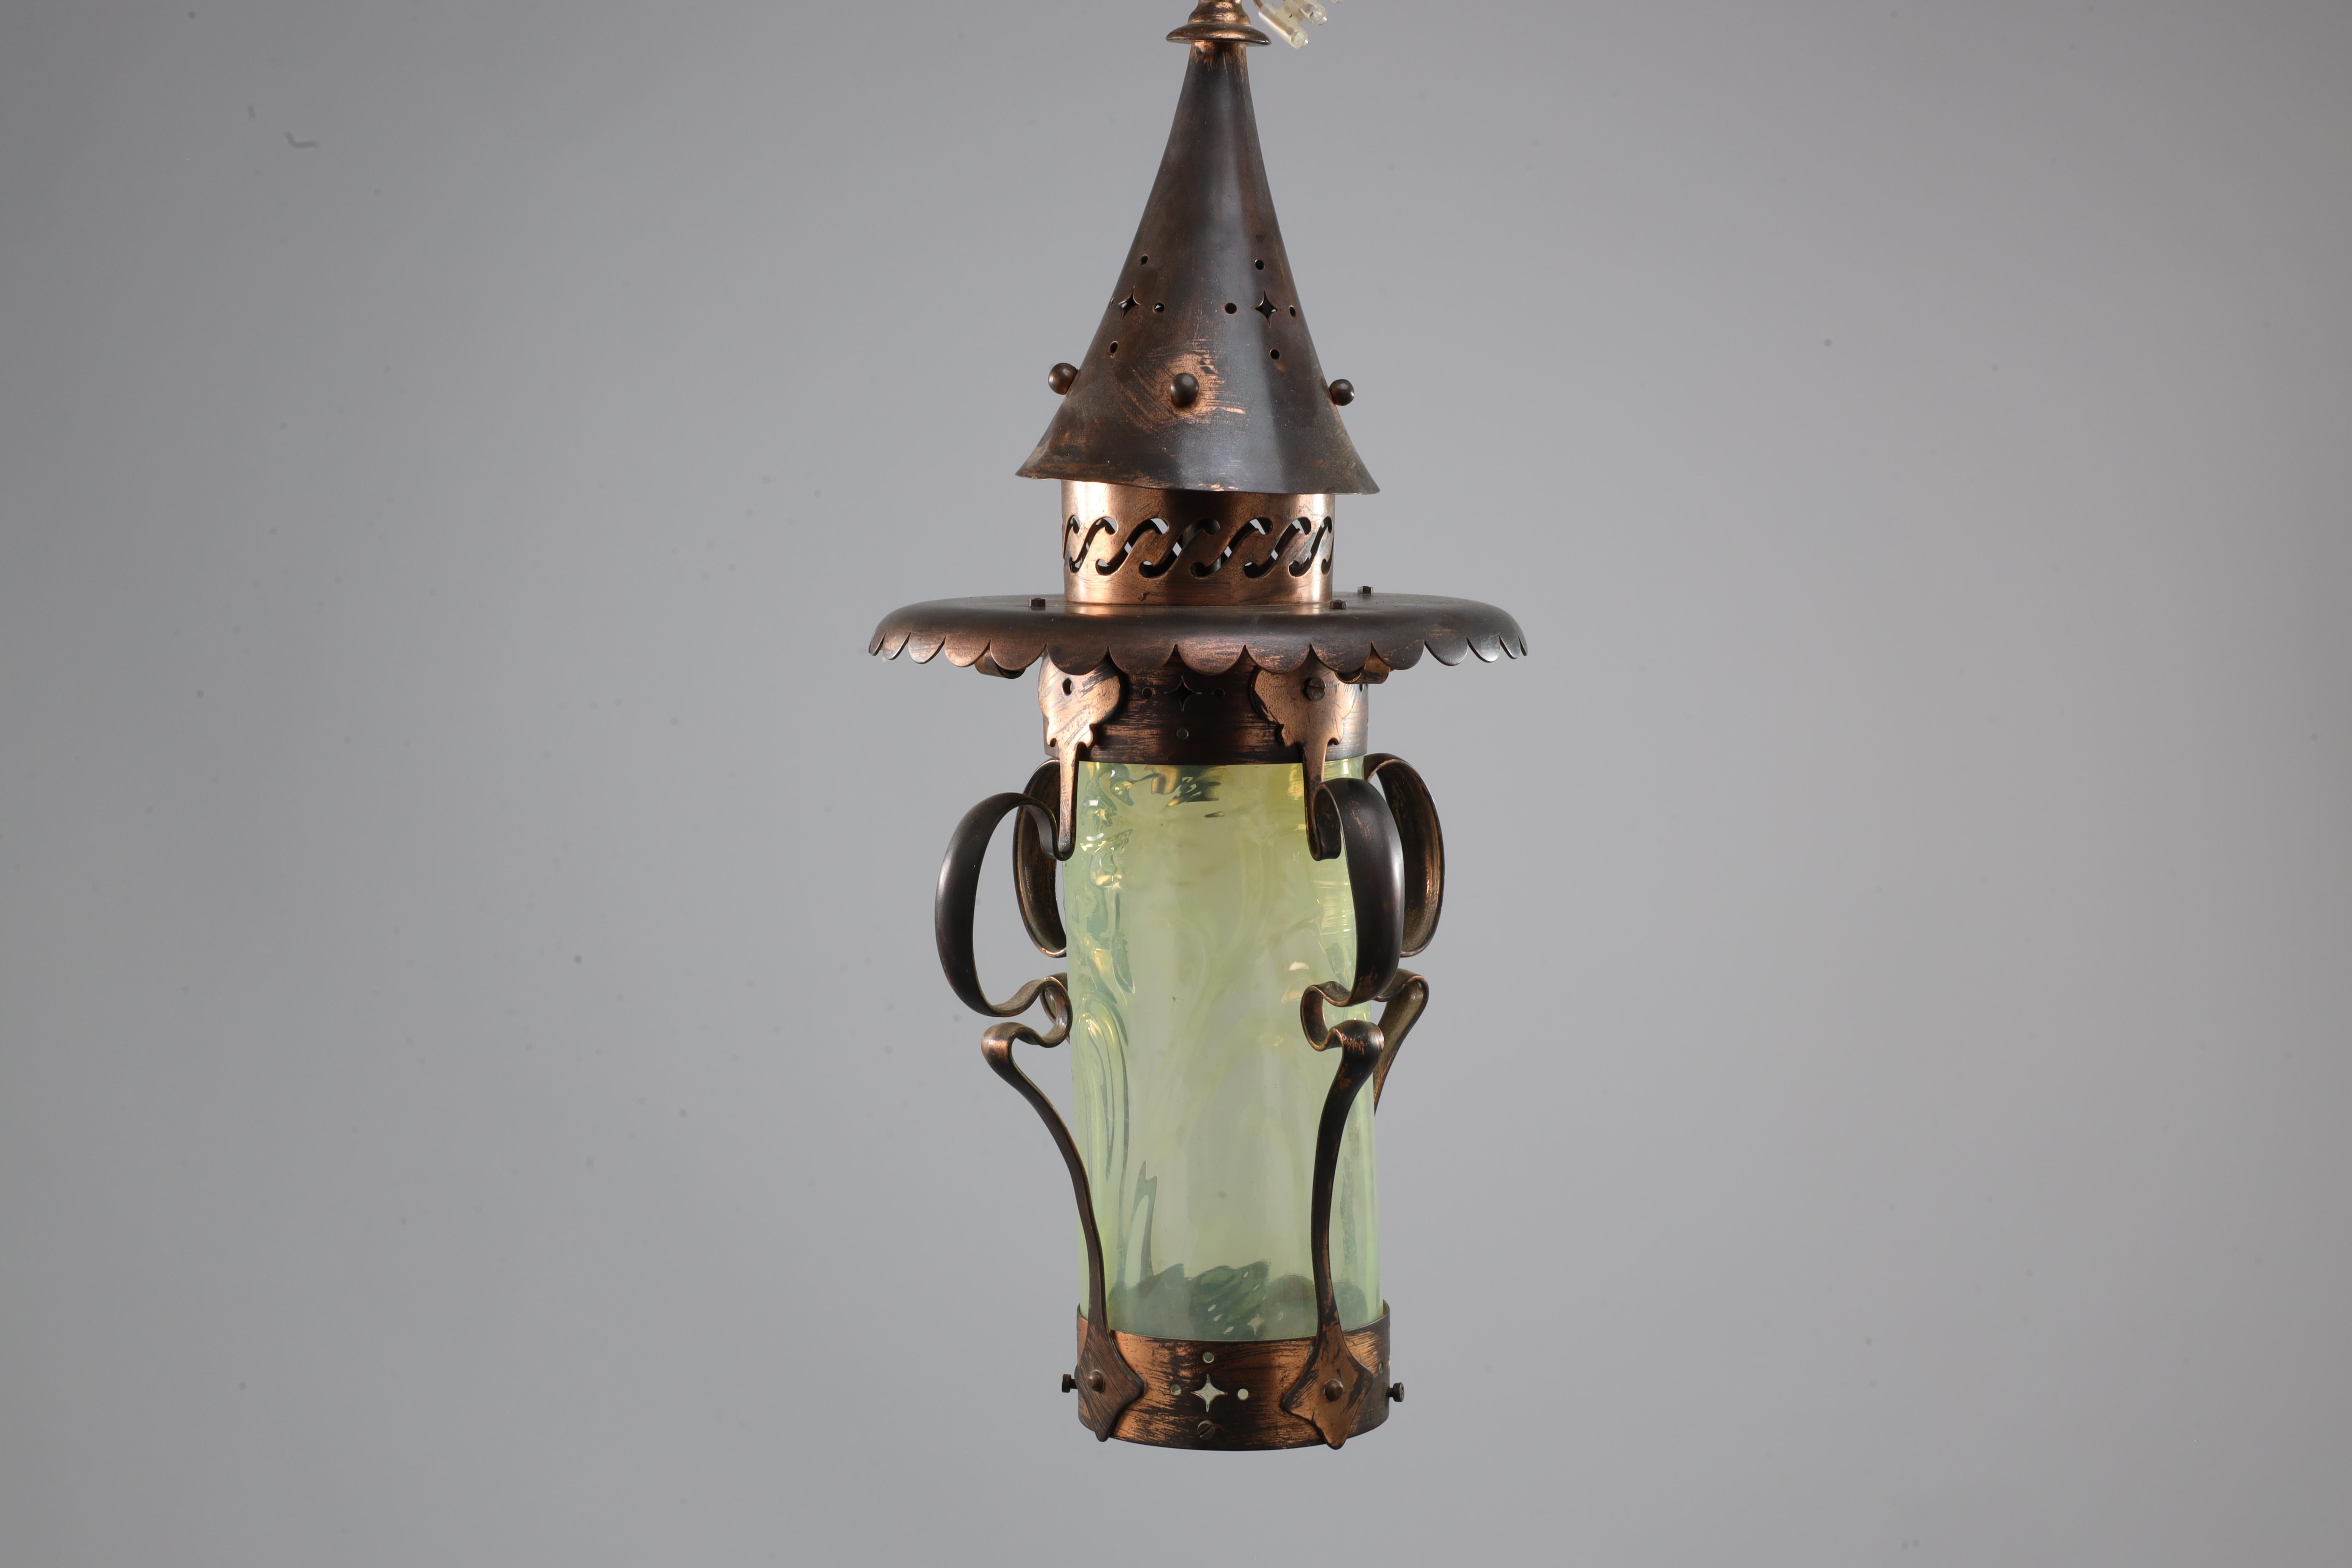 An Arts and Crafts copper & Vaseline lantern with floral flowing decoration with the original Vaseline shade with flowers in the glass. We have an original brass chain to hang this at any height.